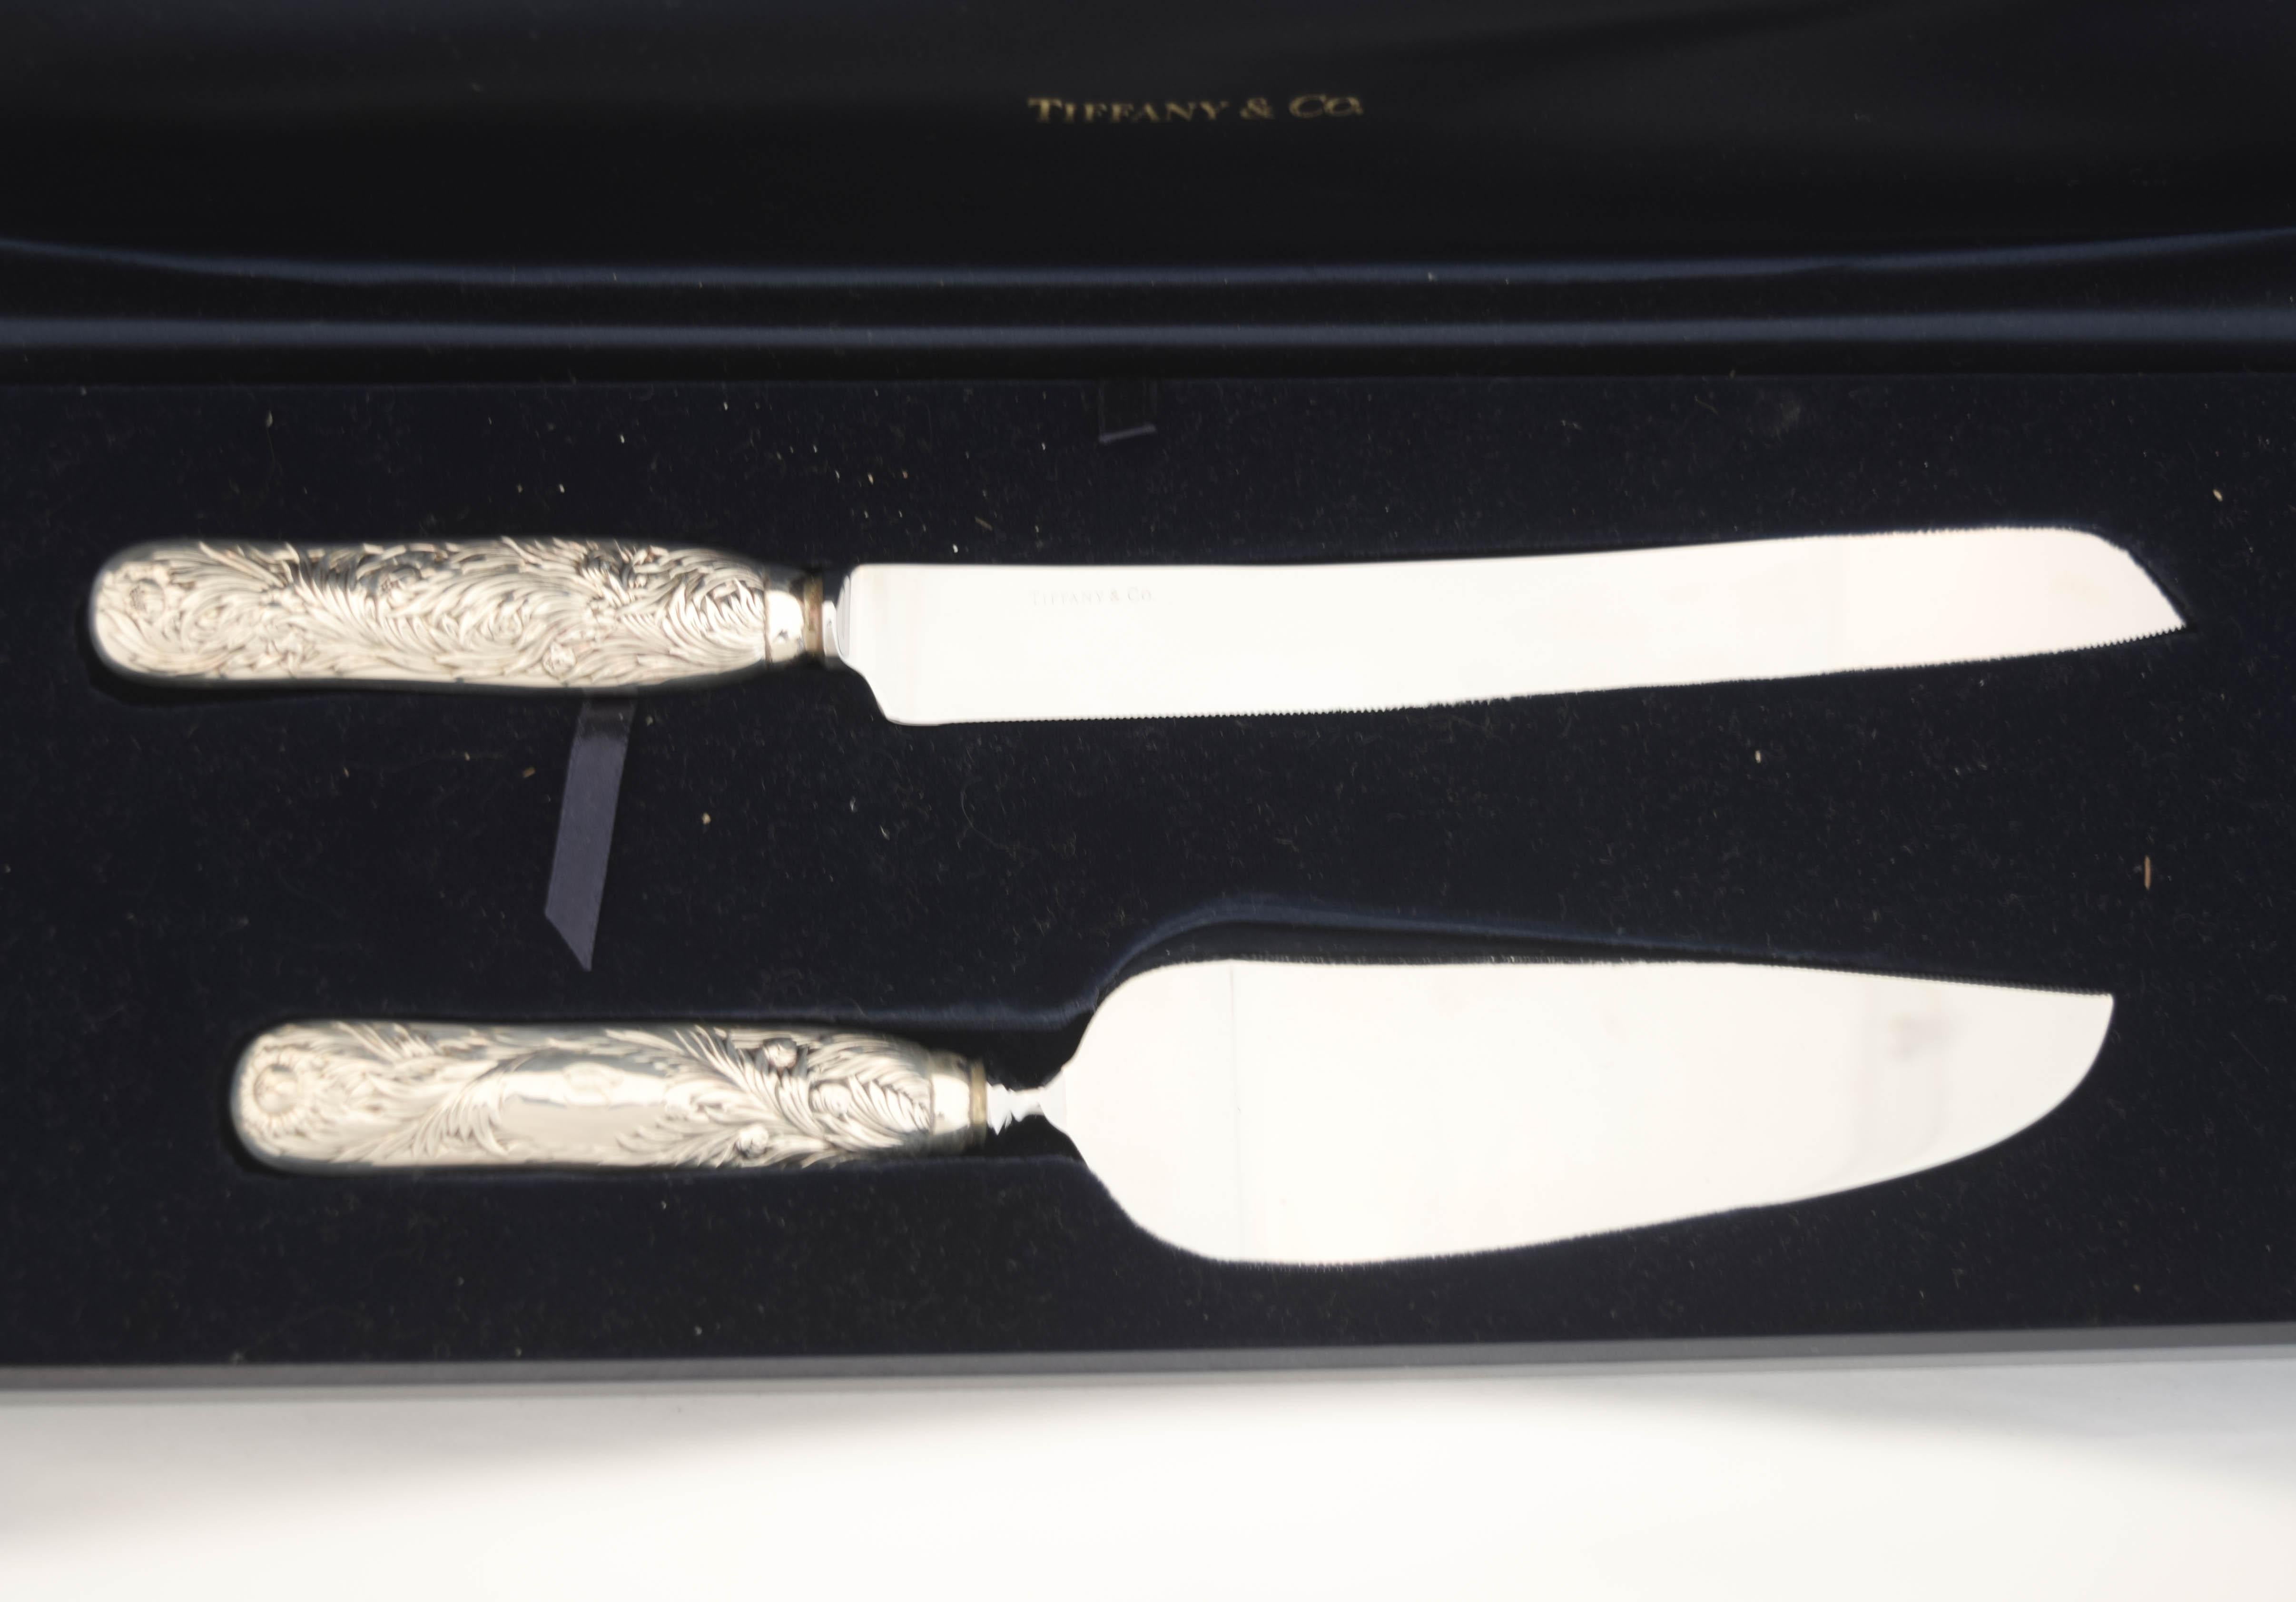 Being offered is a sterling silver Tiffany & Company cake knife and server in the original box.  This is an amazing gift for any engaged couple to use on their wedding day.  Designed in Tiffany’s iconic “Chrysanthemum” pattern, each piece fits in